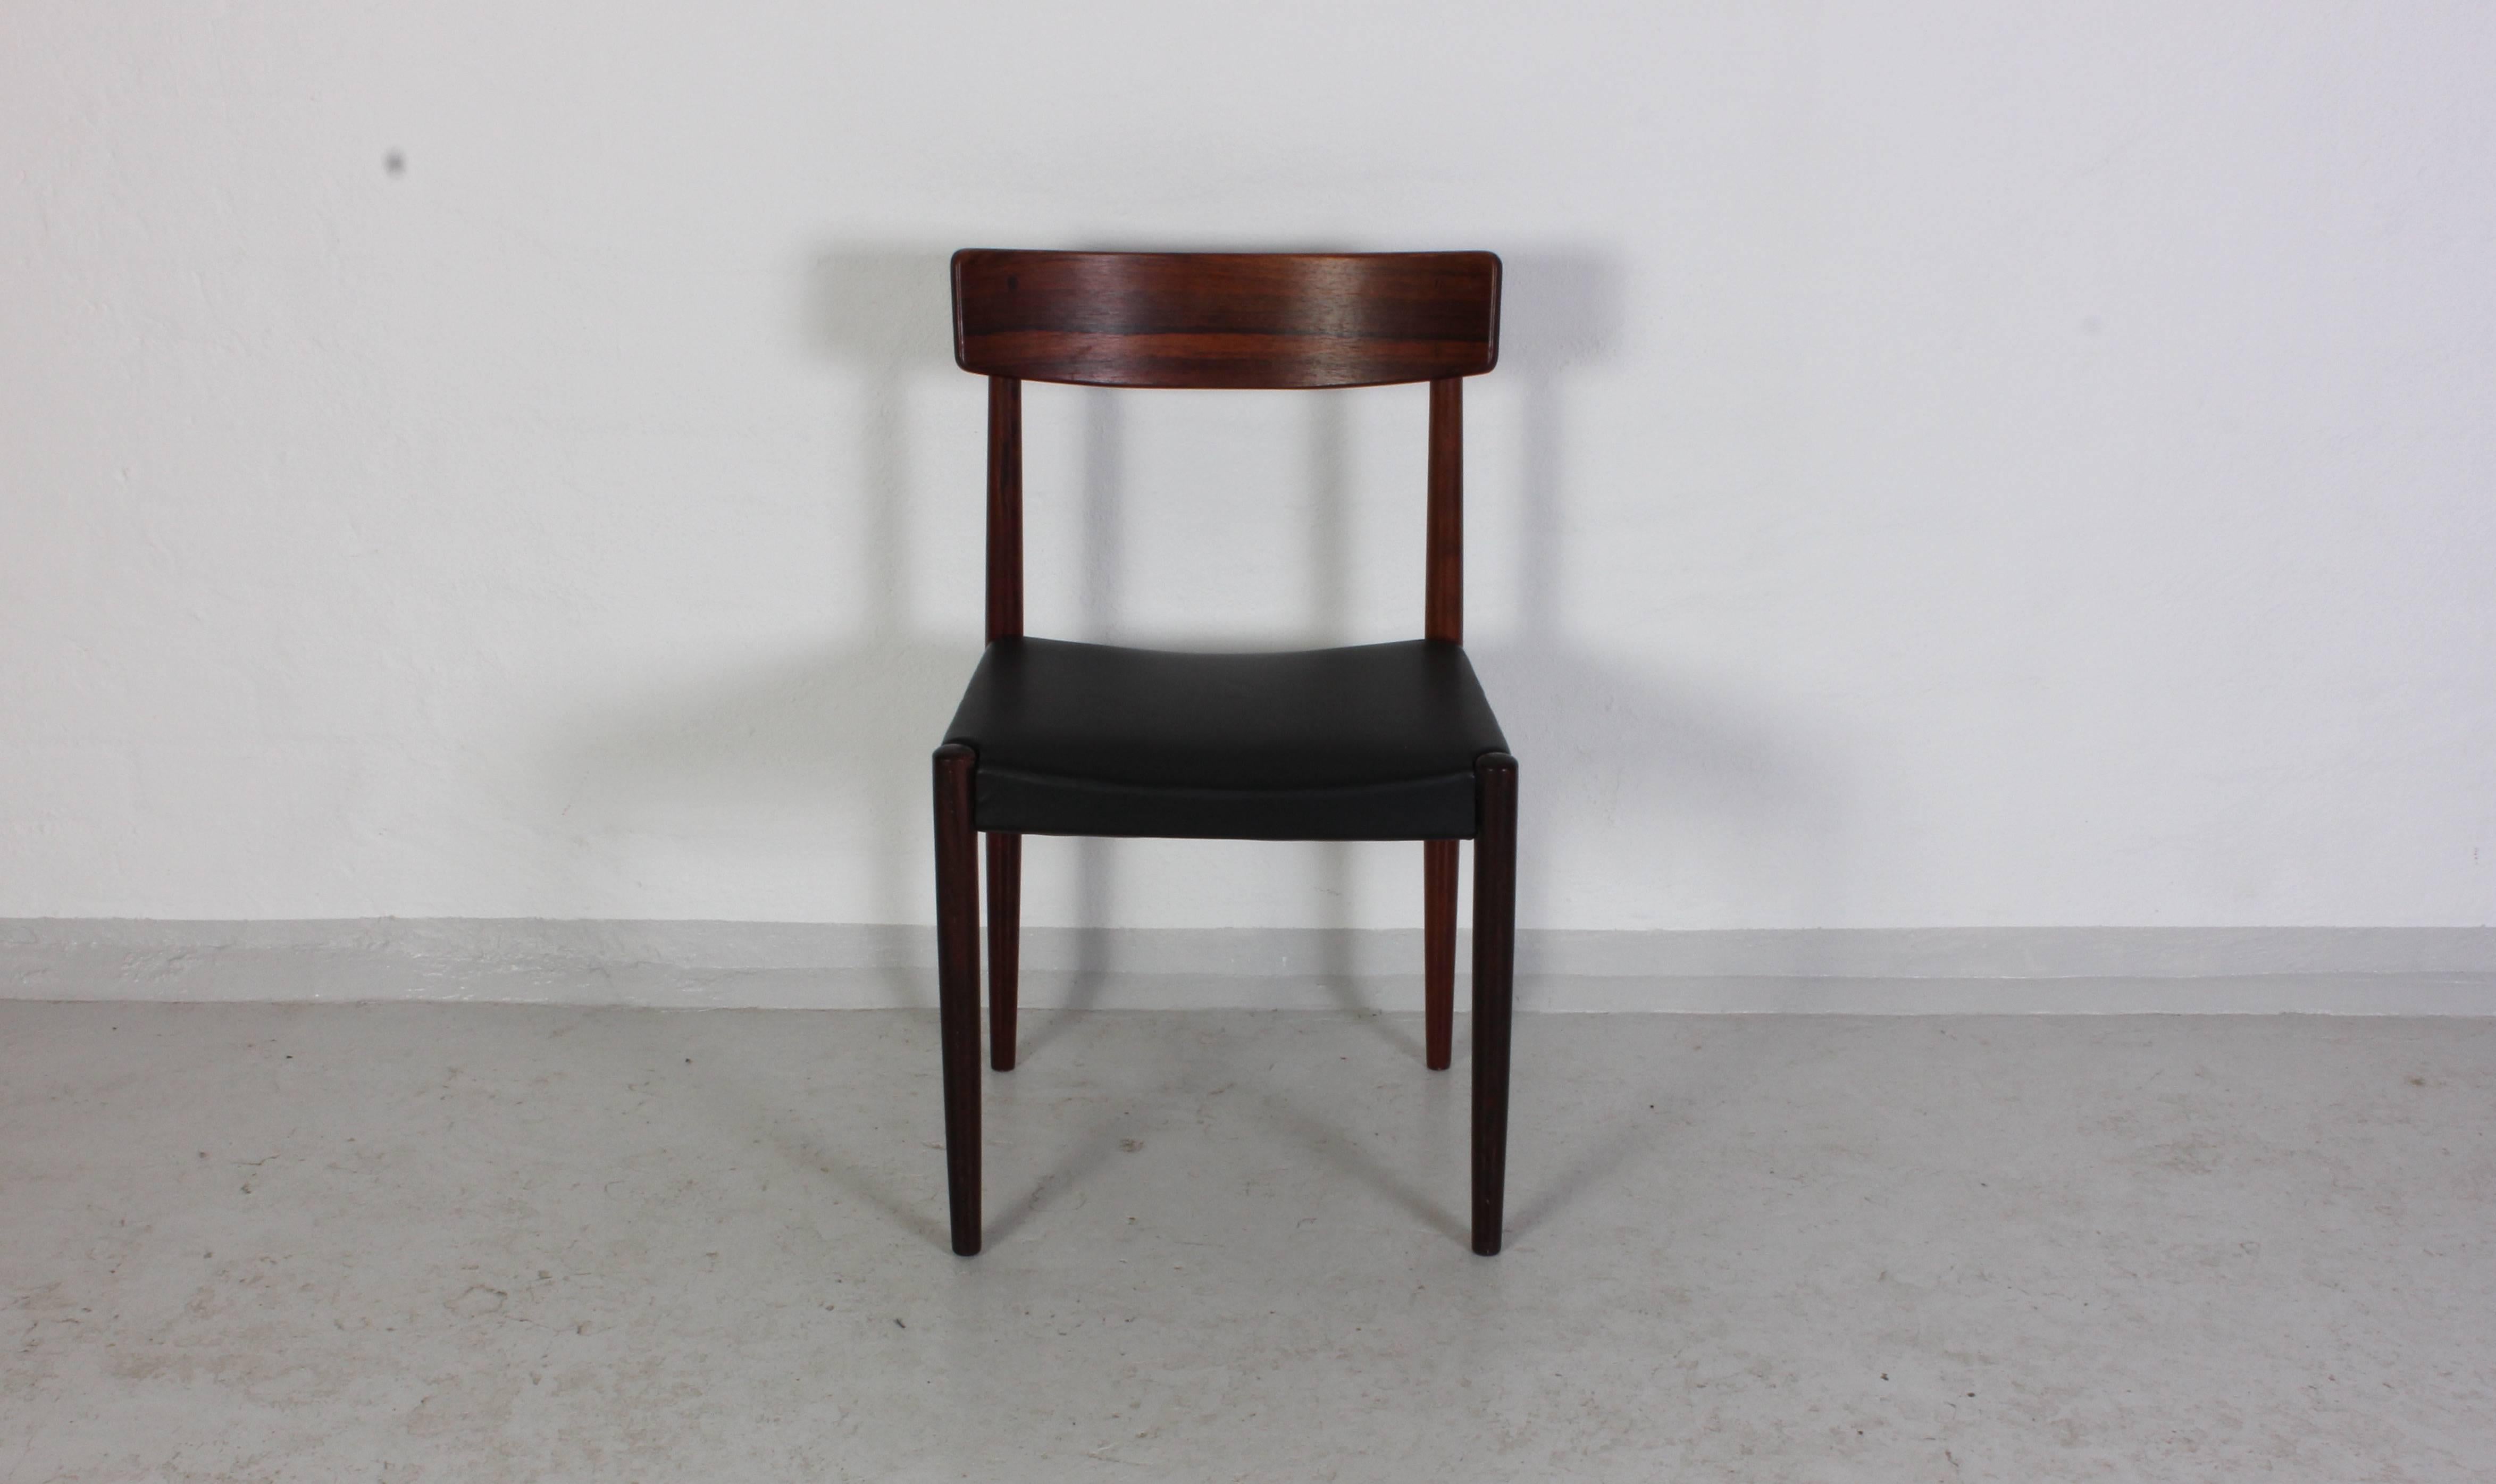 Set of four rosewood dining chairs by Swedish designer Nils Jonsson manufactured by Troeds in the 1950s. The chairs are made of rosewood with nice grain and they have new faux leather upholstery (consistent with the original upholstery). They are